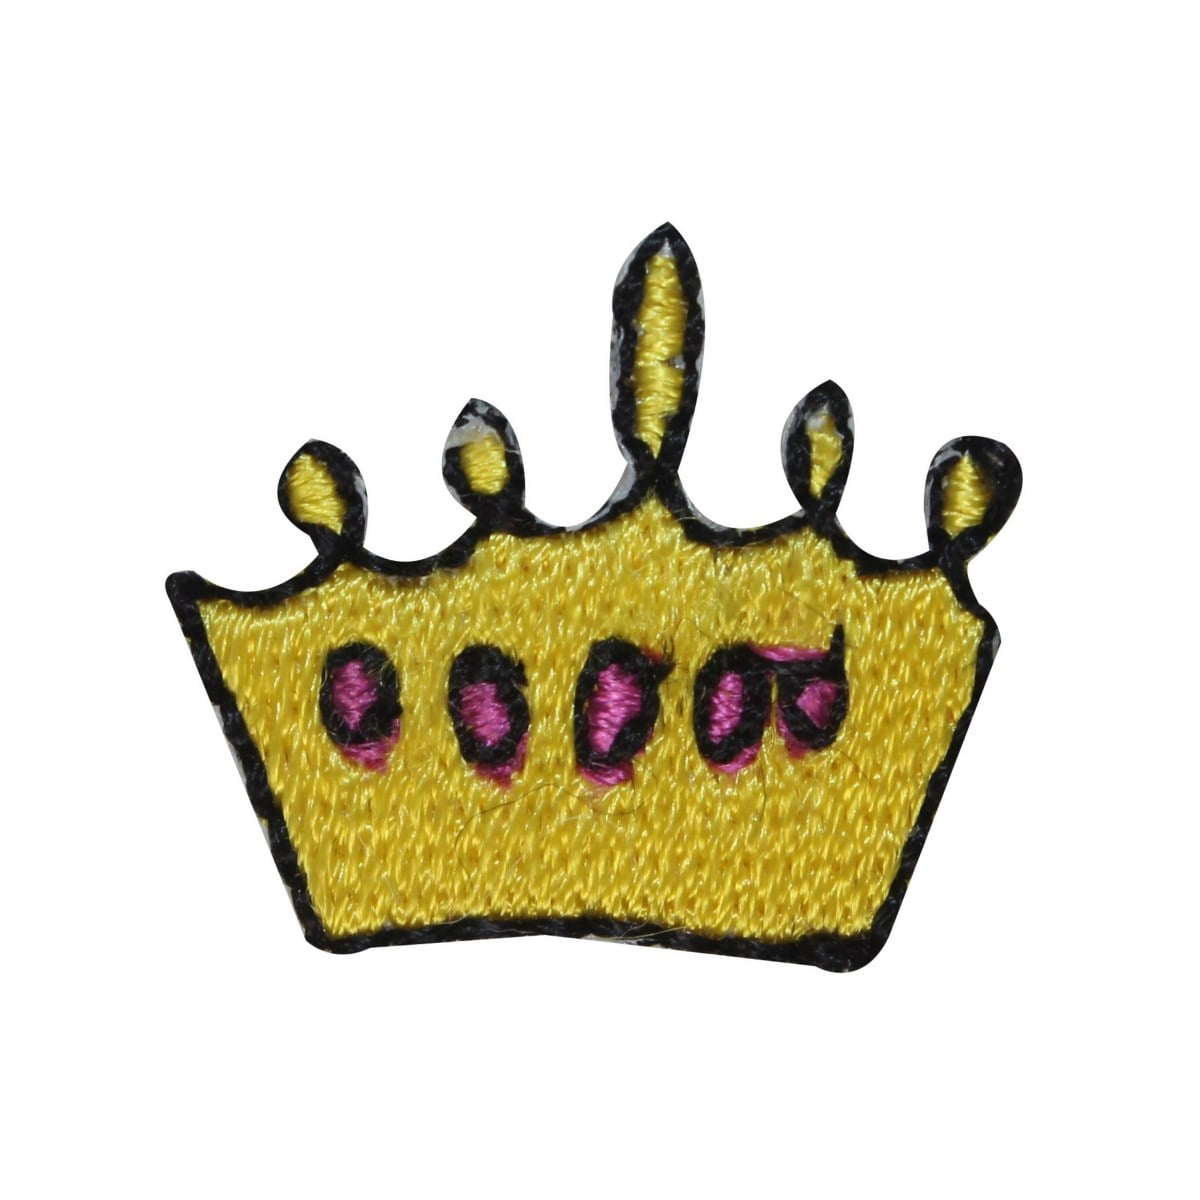 Black Royal King Queen Crown Emblem Embroidered Iron On Patch 1.50 Inches 